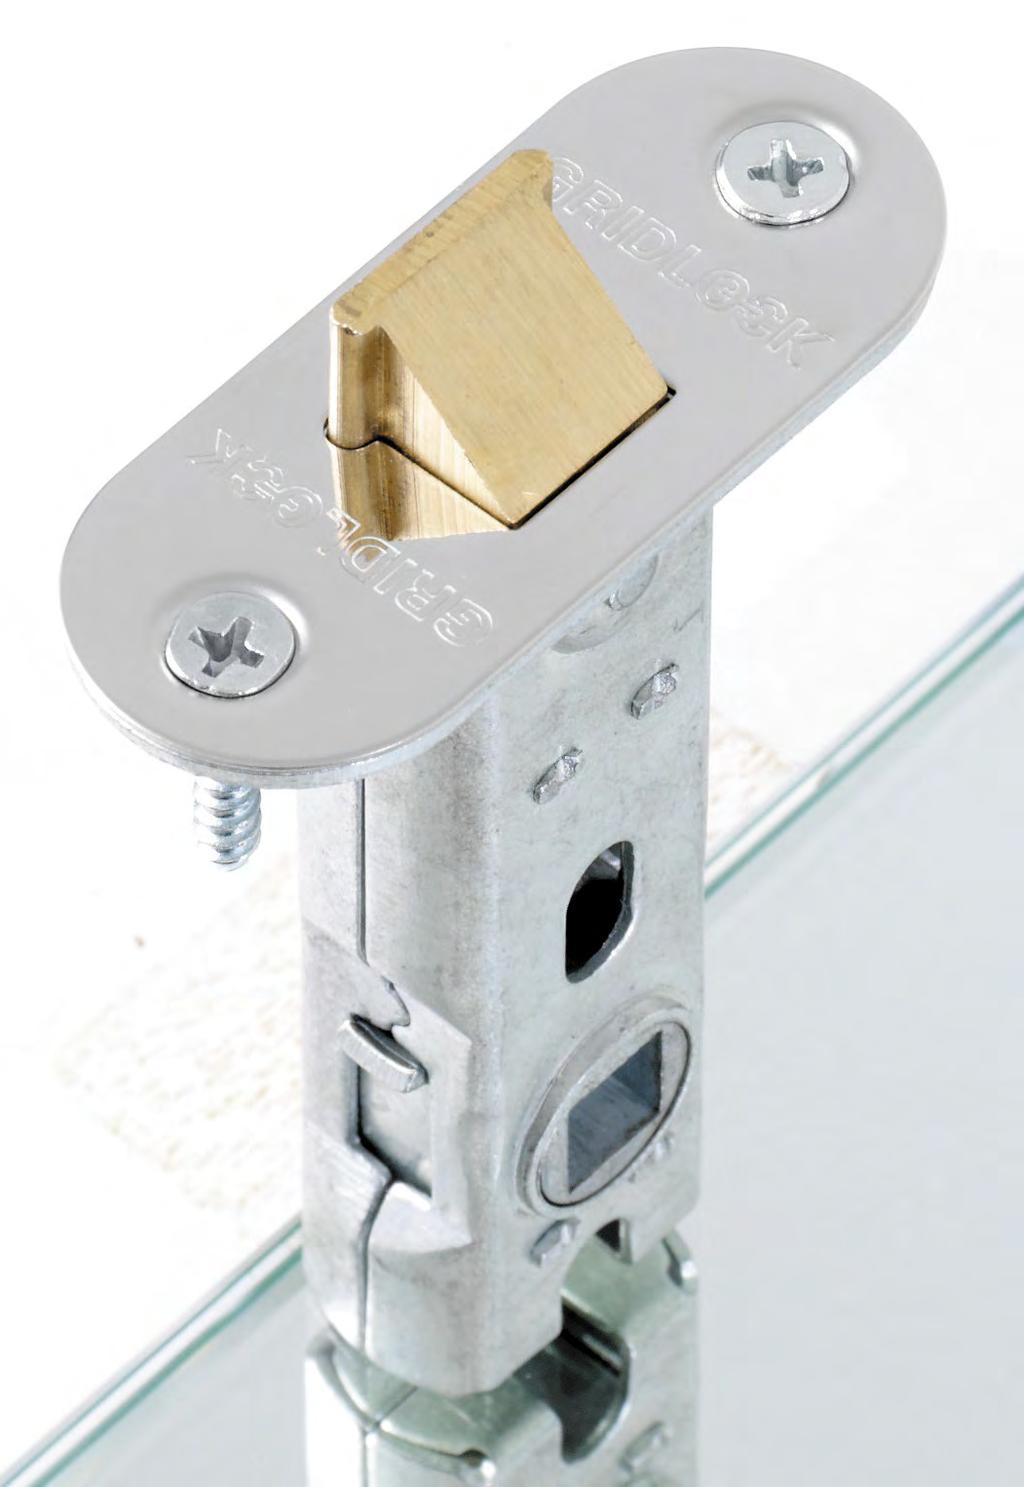 Lightly sprung, suitable for sprung lever furniture. Fits comfortably into 25mm diameter hole. Suitable for bolt-thru door furniture, from 30mm to 40mm centres.